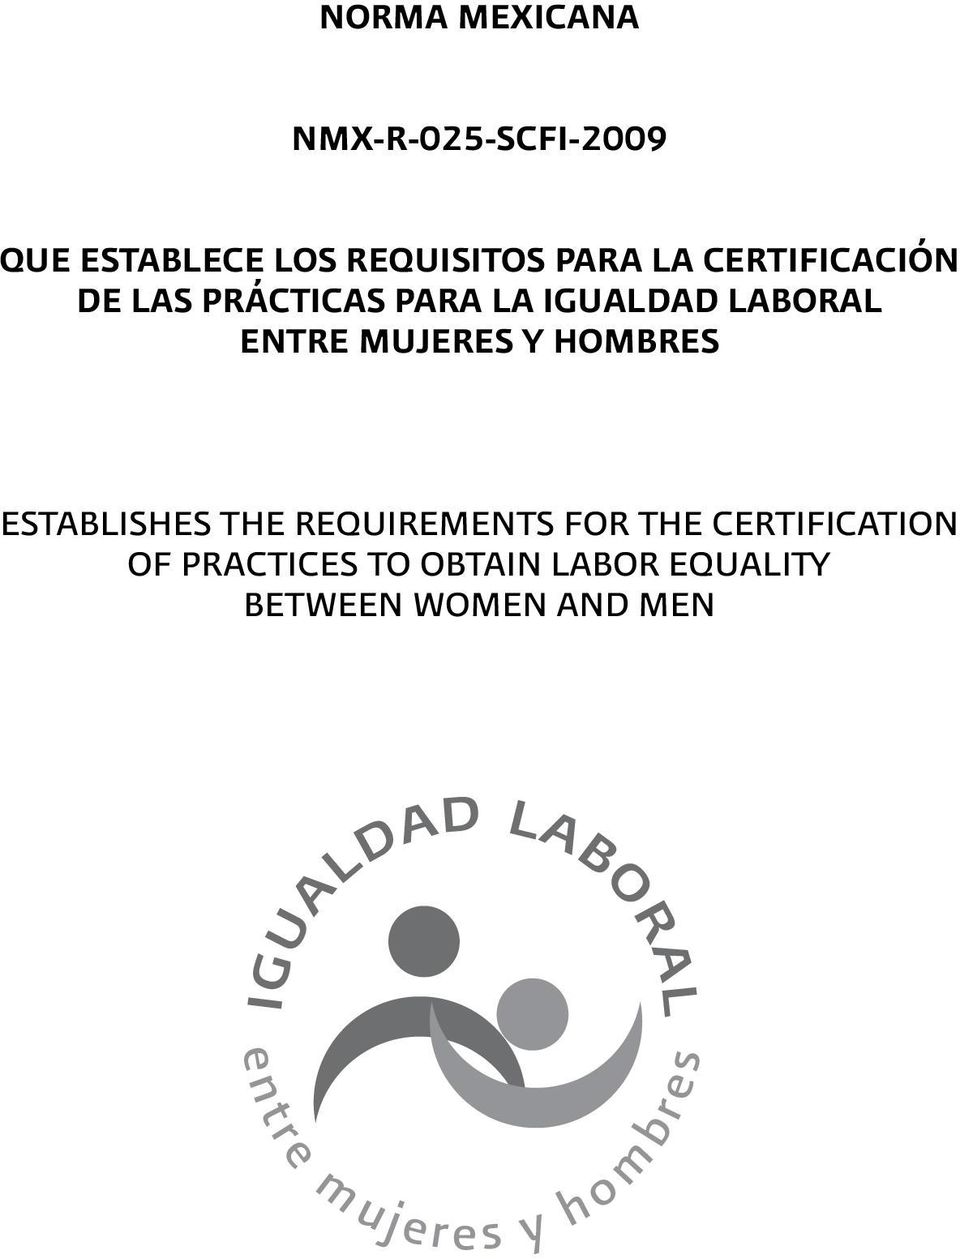 HOMBRES ESTABLISHES THE REQUIREMENTS FOR THE CERTIFICATION OF PRACTICES TO